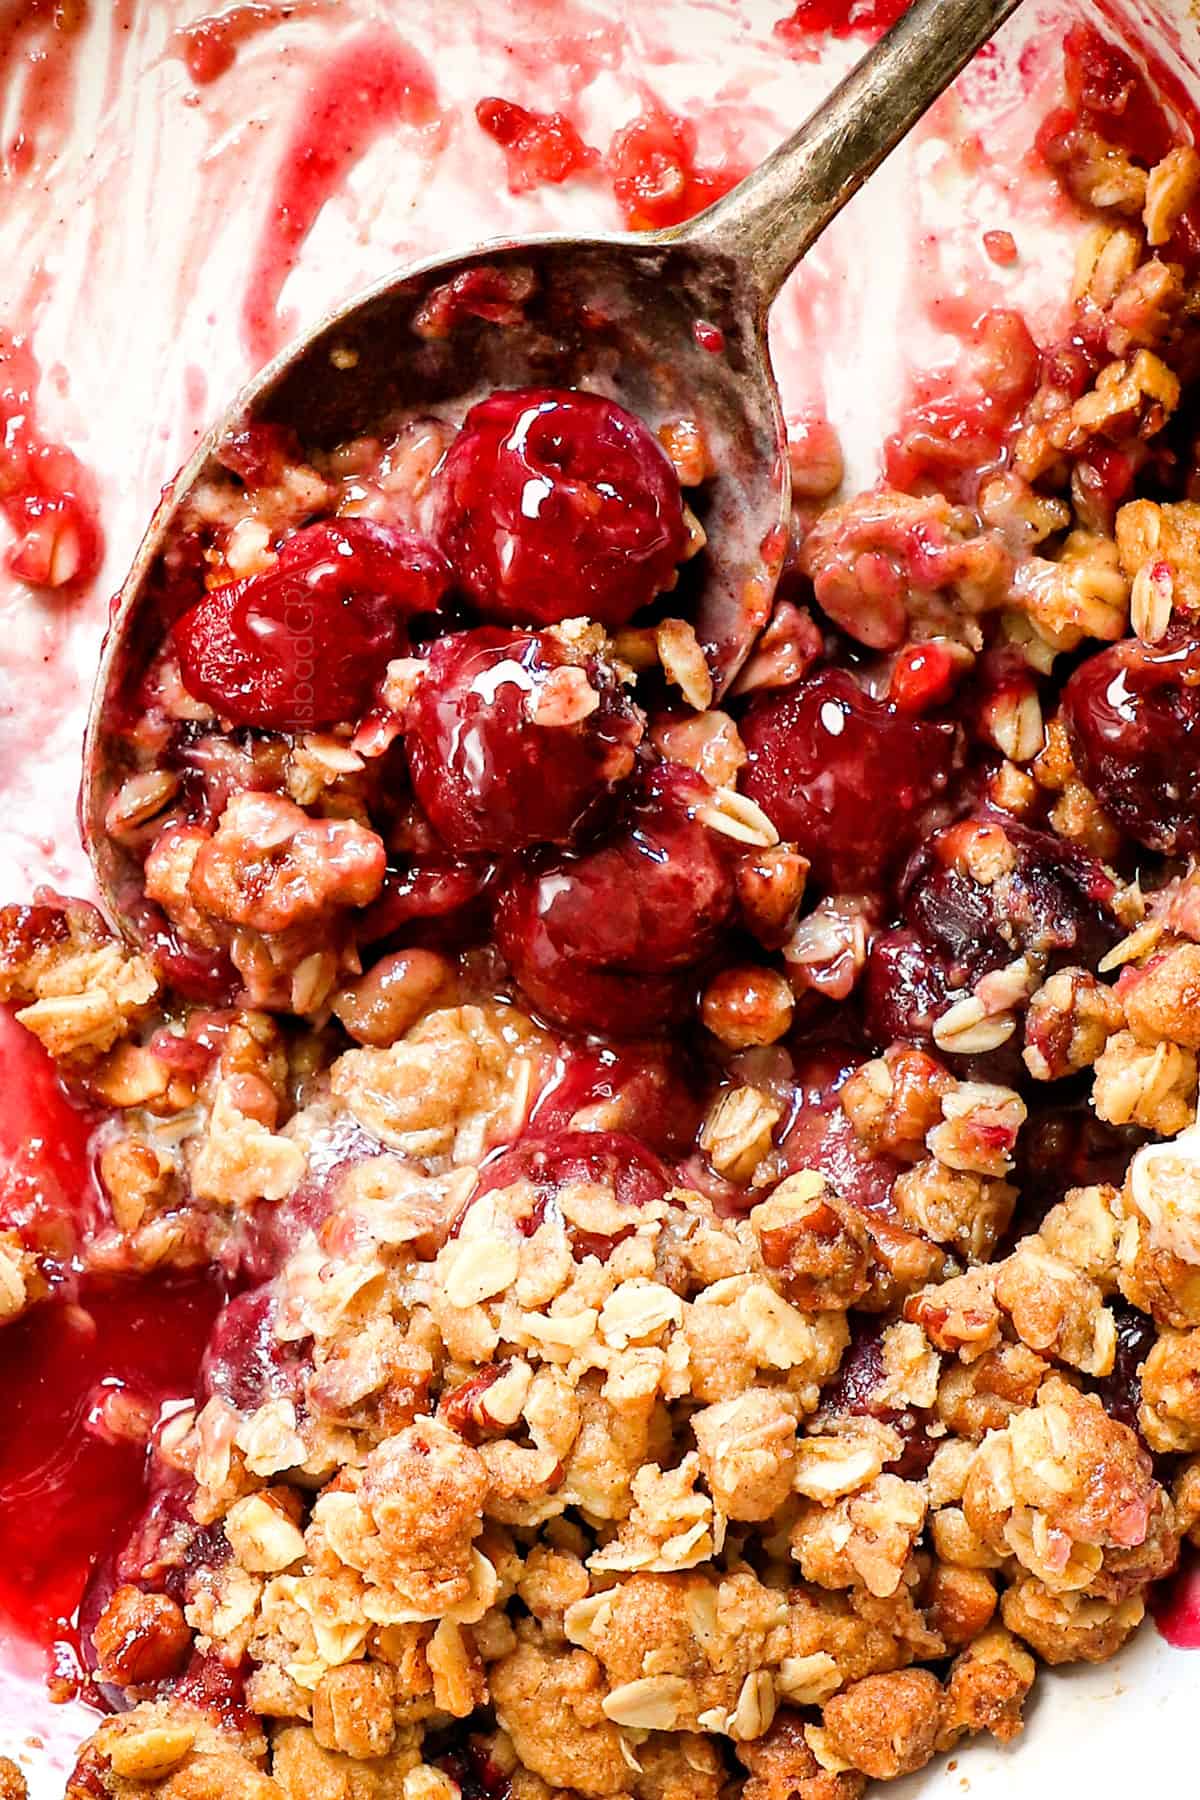 up close of scooping up cherry crisp recipe showing the tender cherries